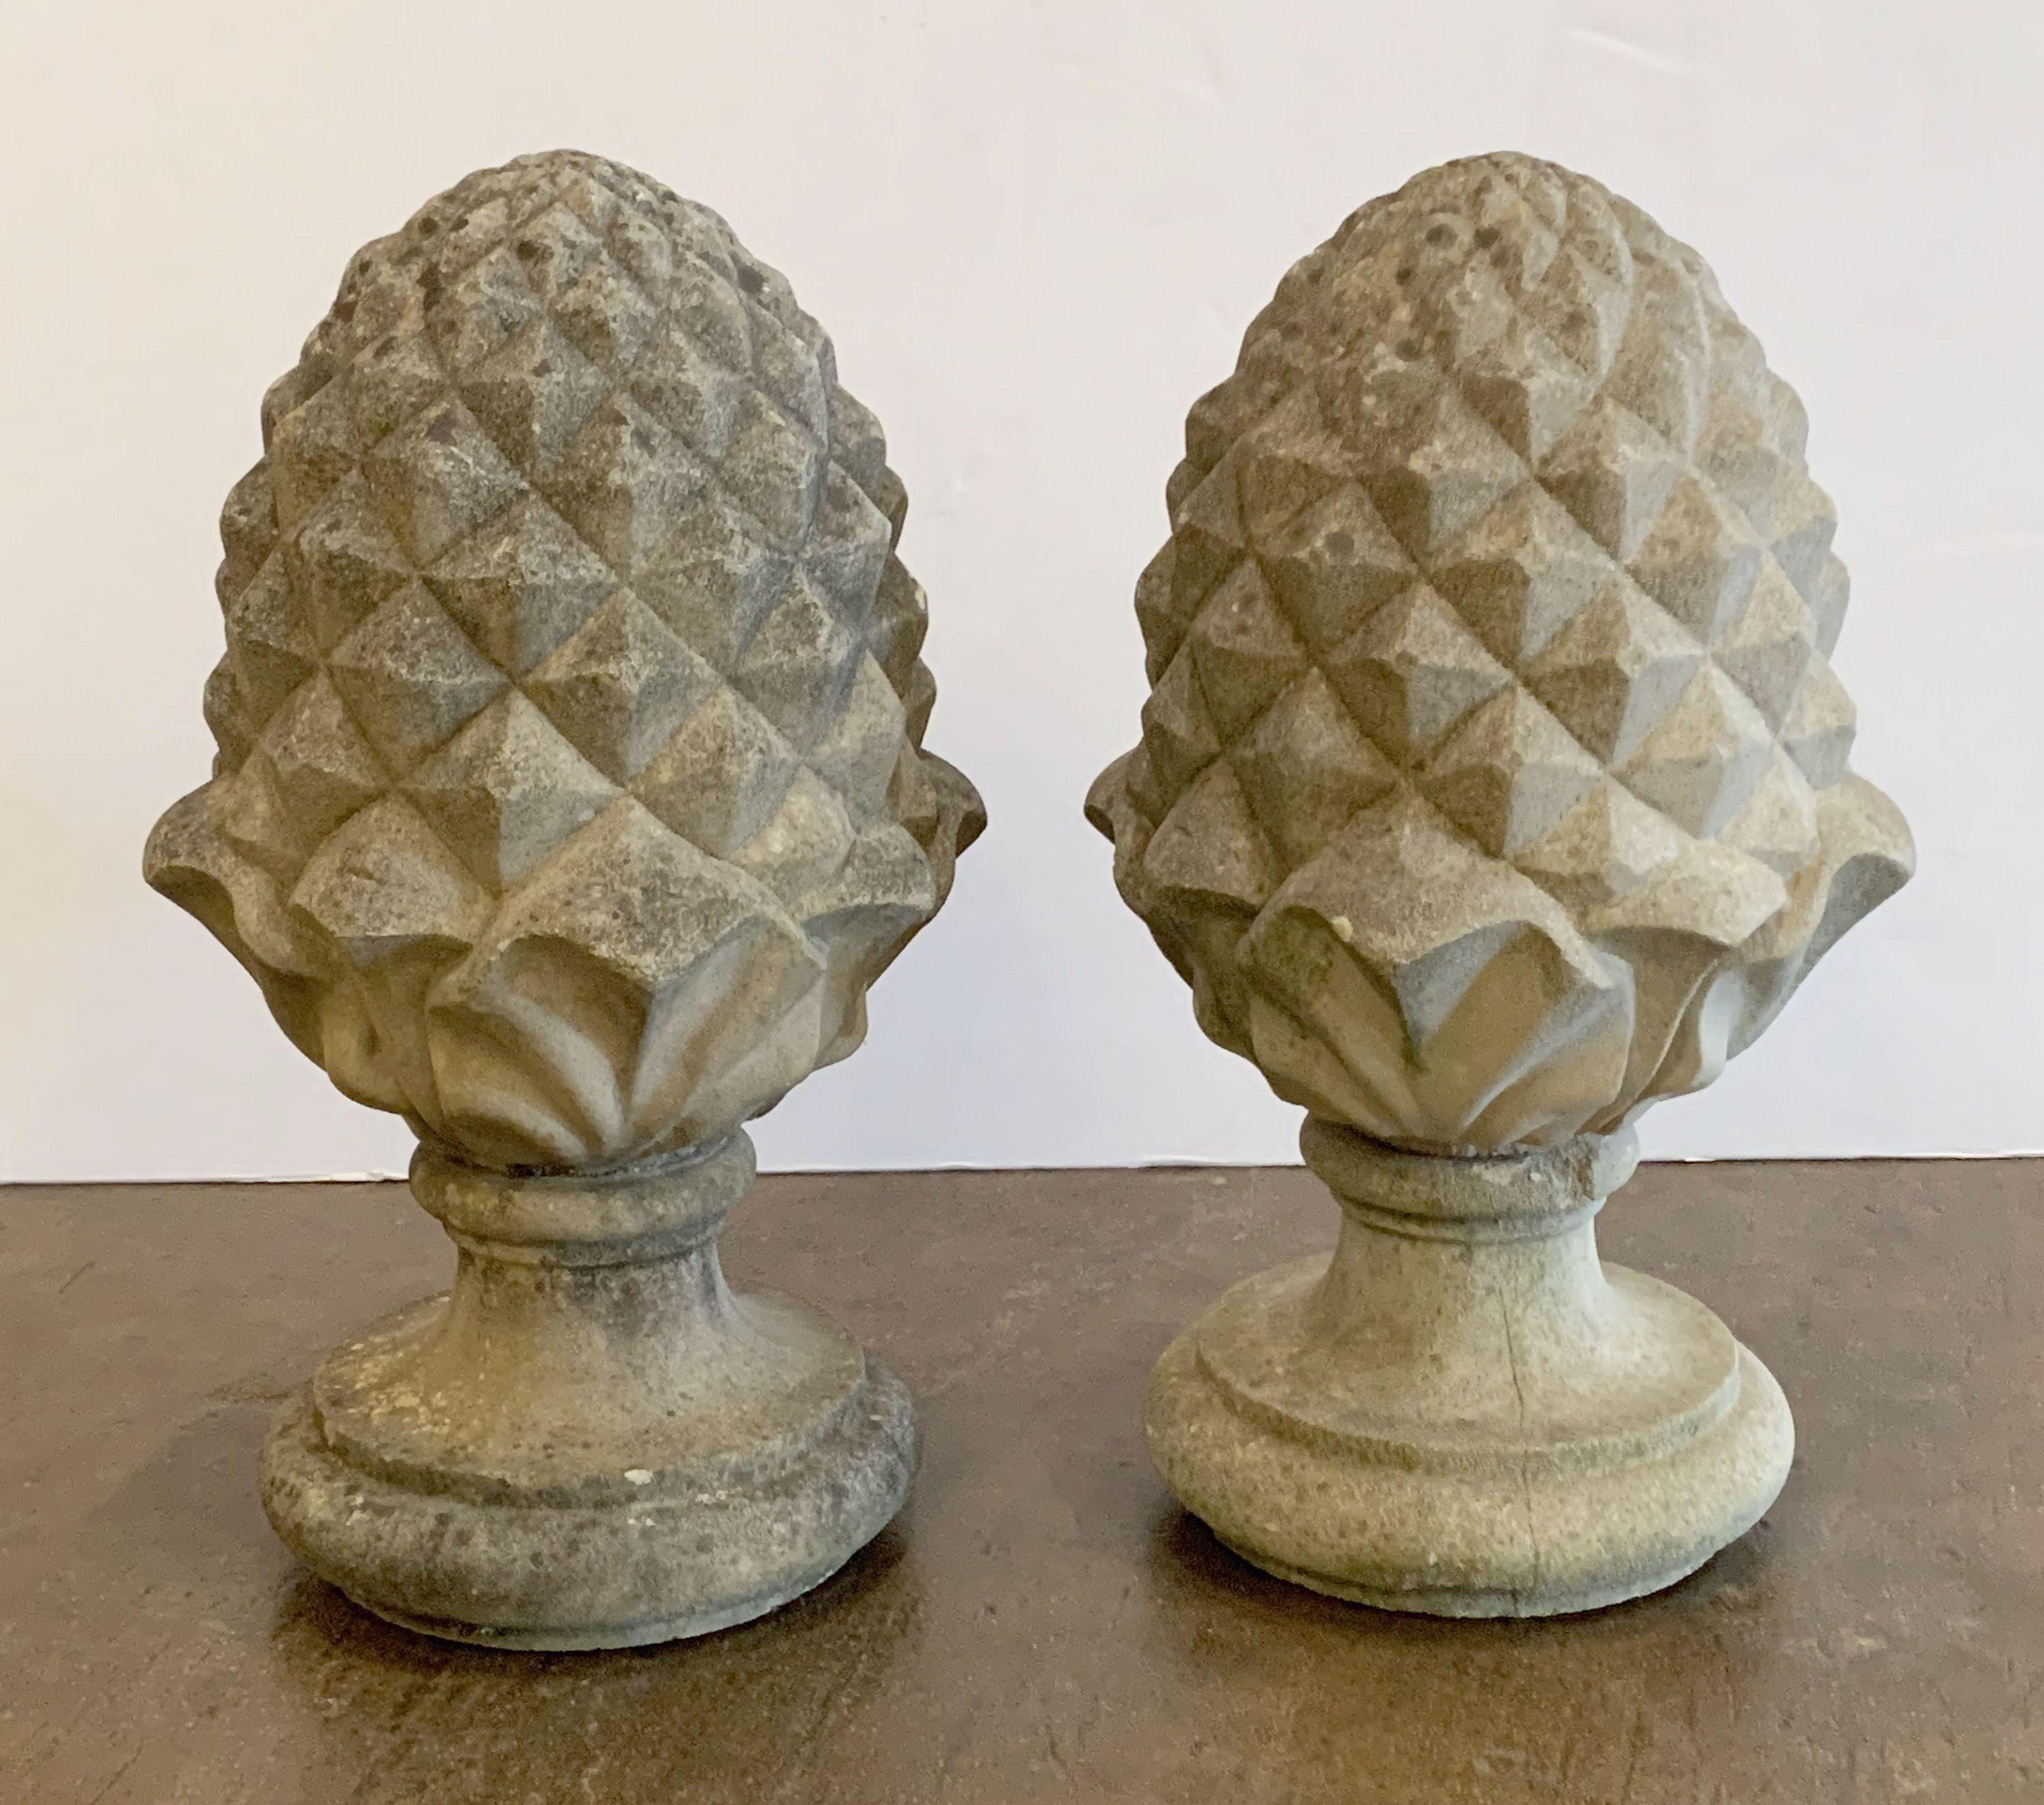 A fine pair of large English garden ornamental finials of composition stone, each finial featuring a stylized design of an acorn or pineapple or artichoke.

Two available - Individually priced - $2395 each finial.